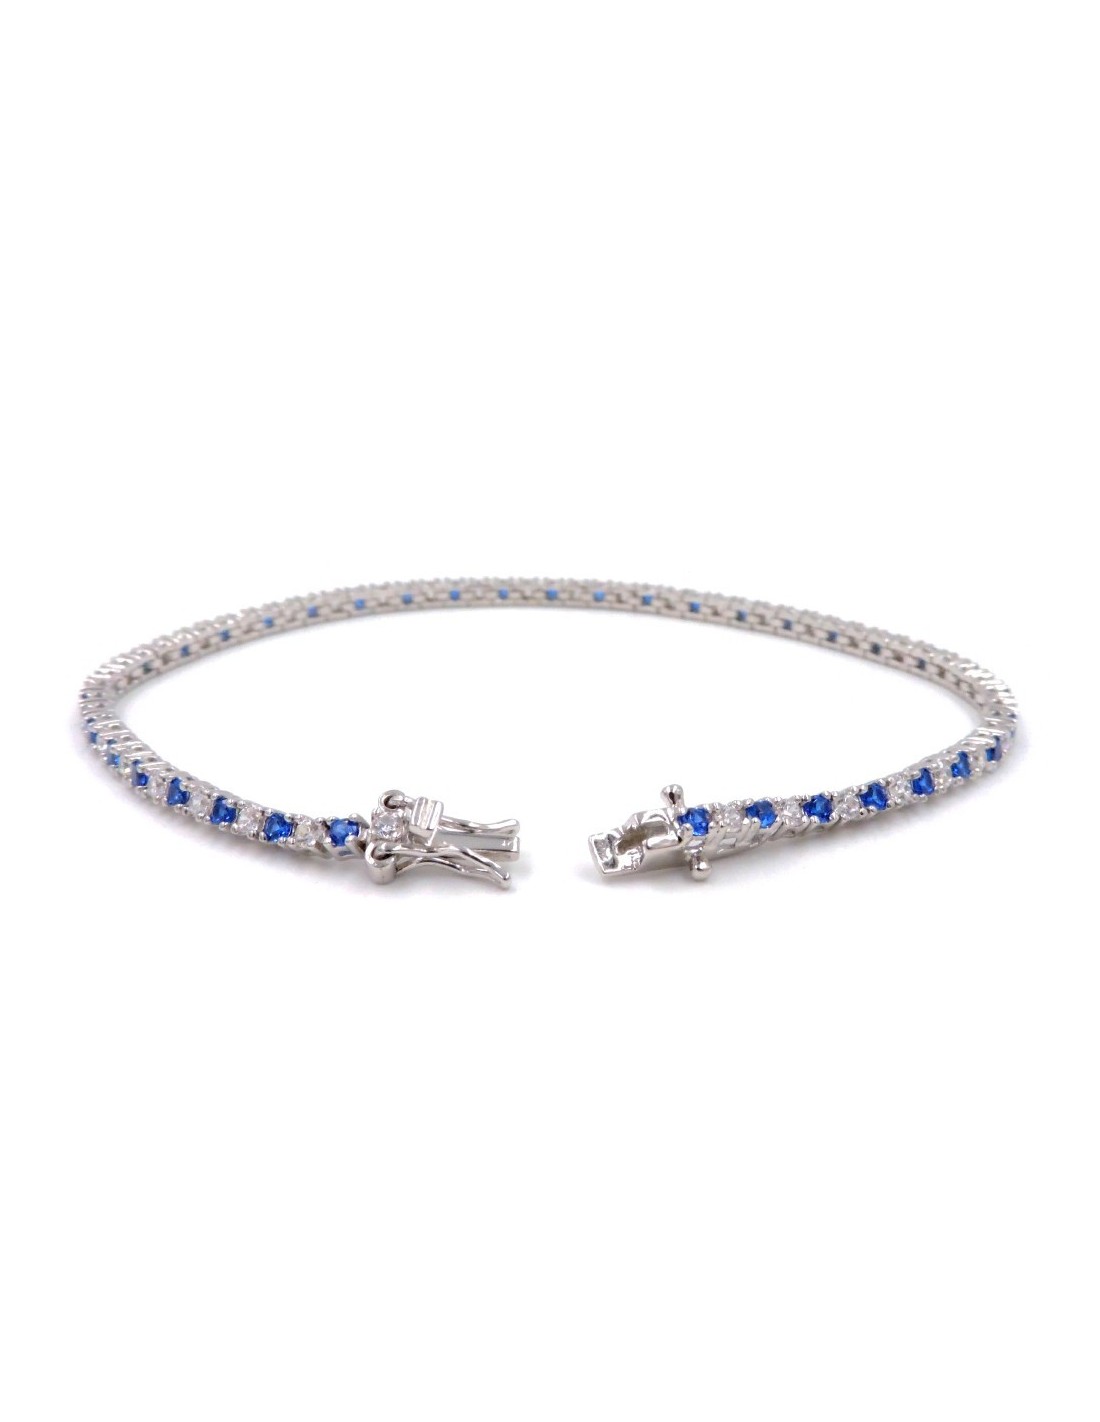 925 Sterling Silver Tennis Bracelet with White and Blue Zircons - M.B